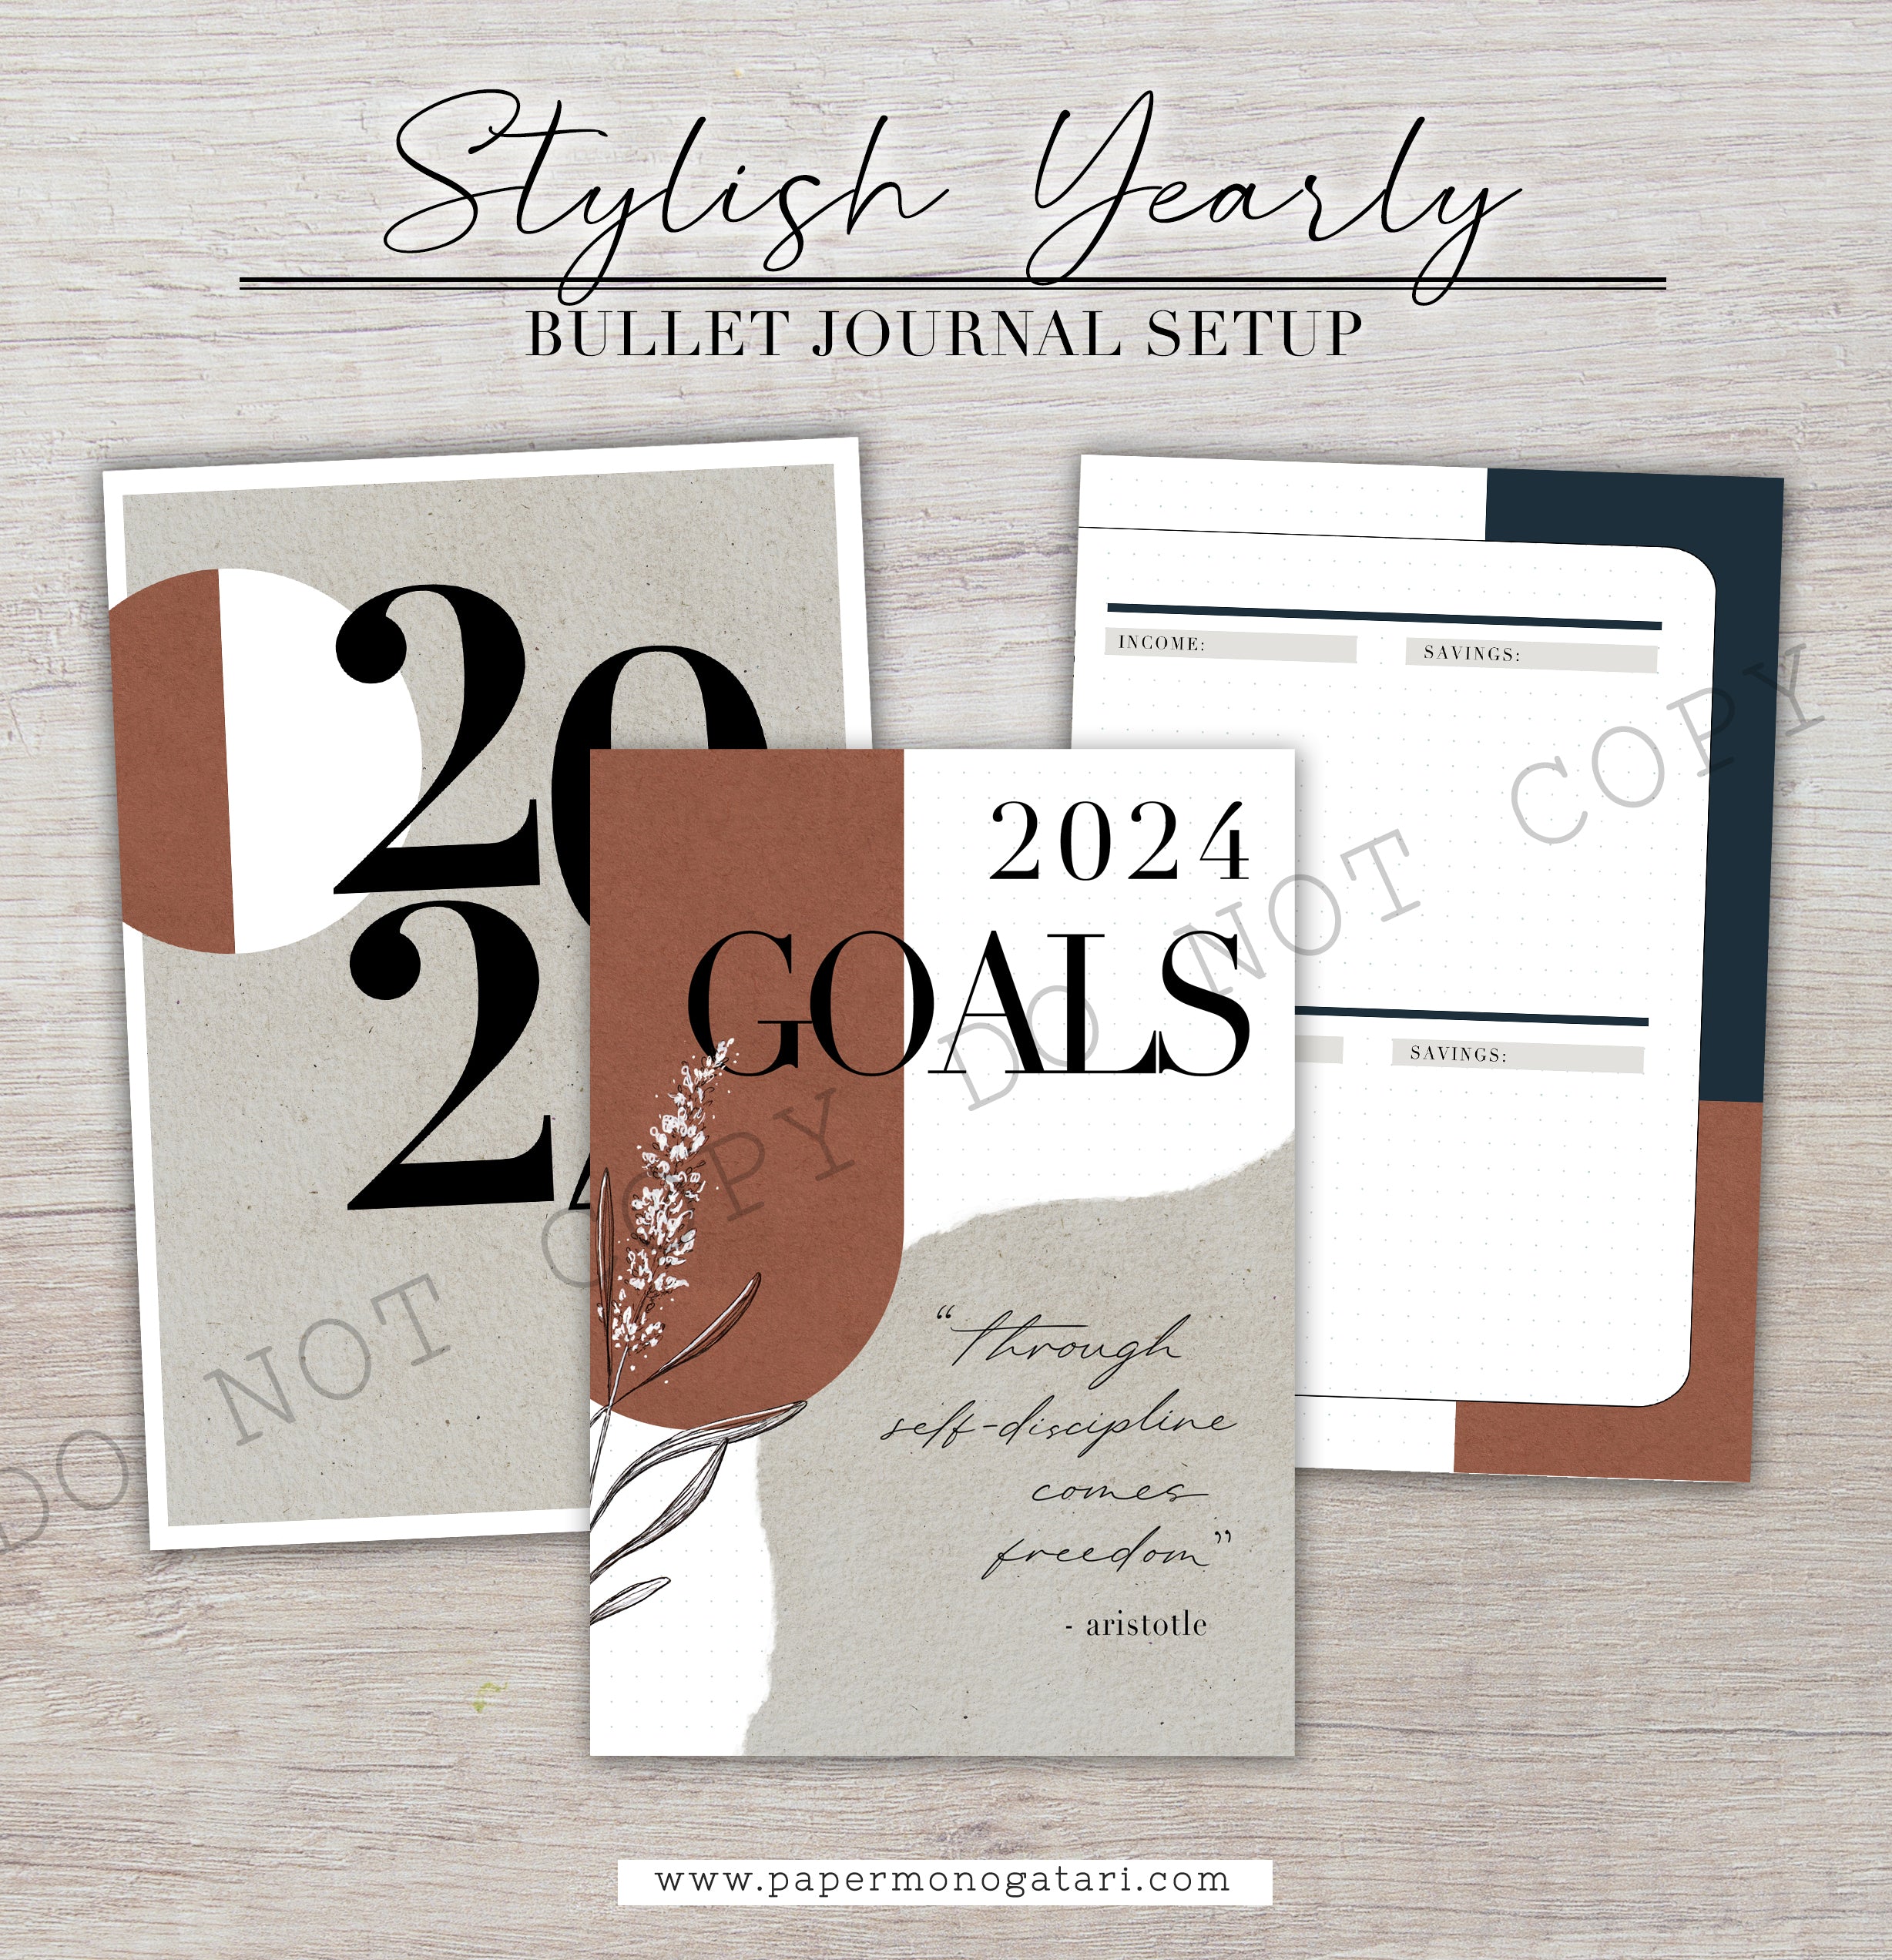 Bullet Journal Setup: A step by step tutorial to setup your bujo for 2024